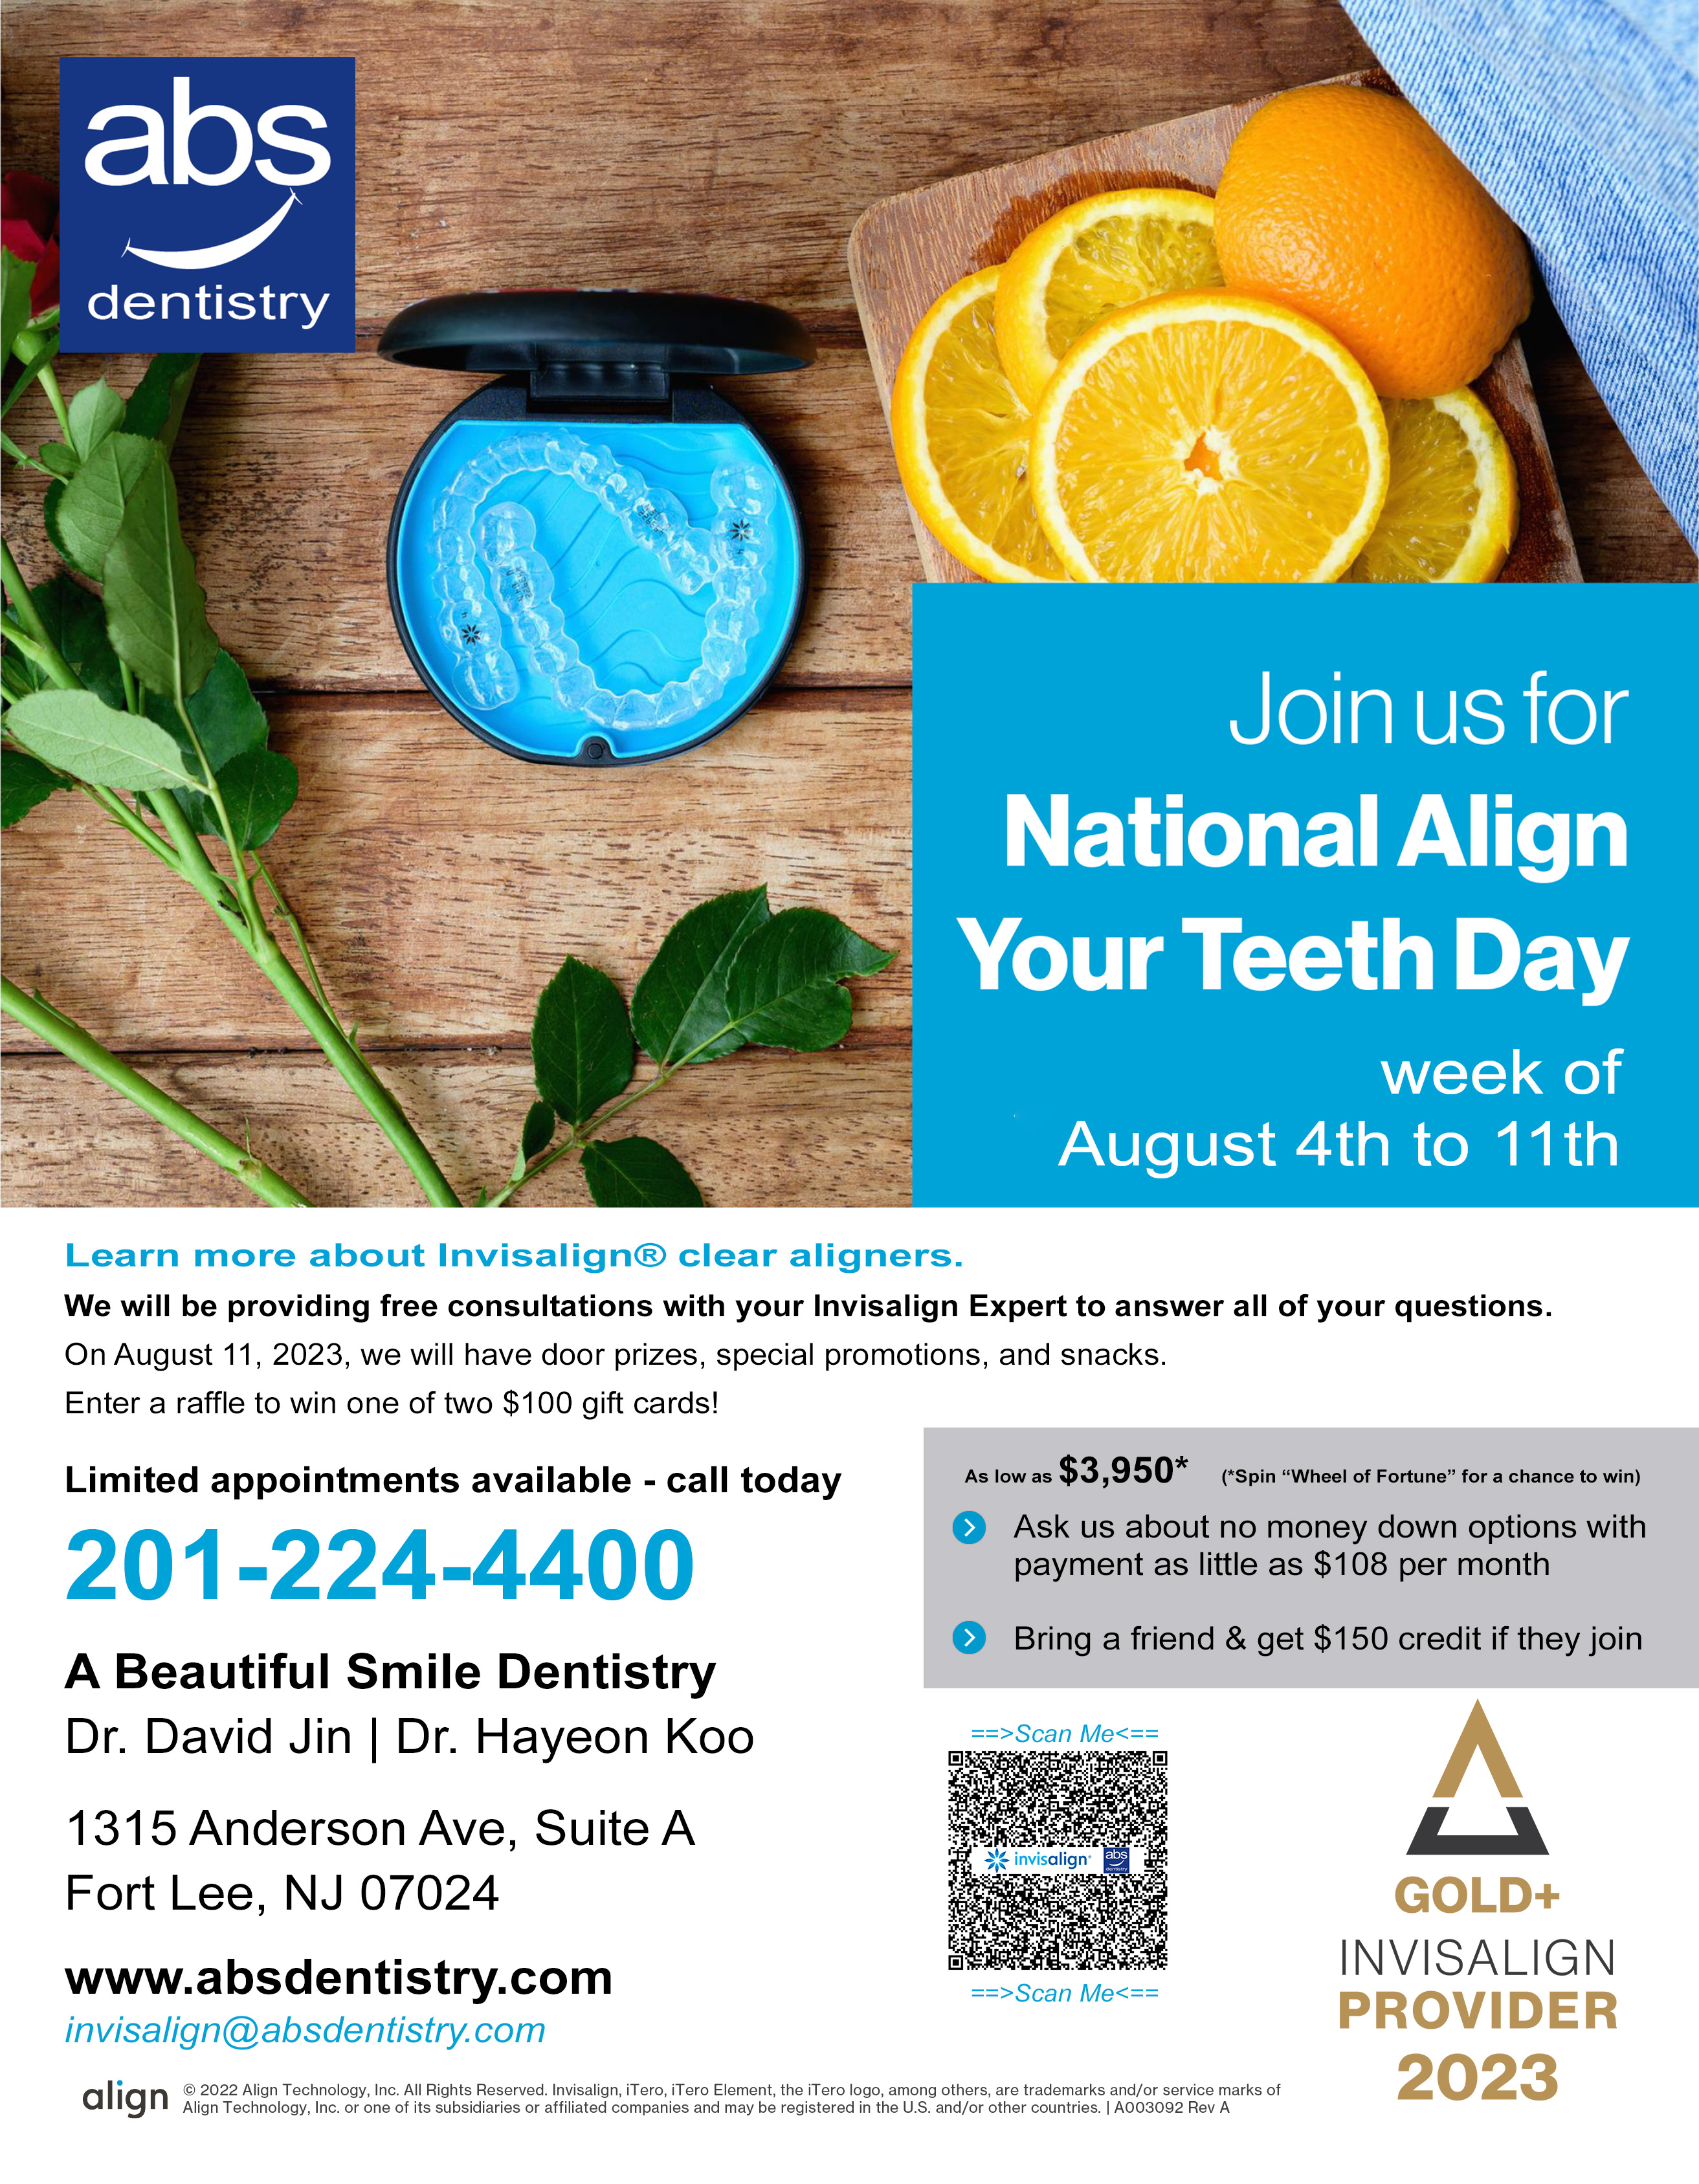 Area we service - Invisalign - Fort Lee, Bergen County, Hudson County, and New York City, NYC